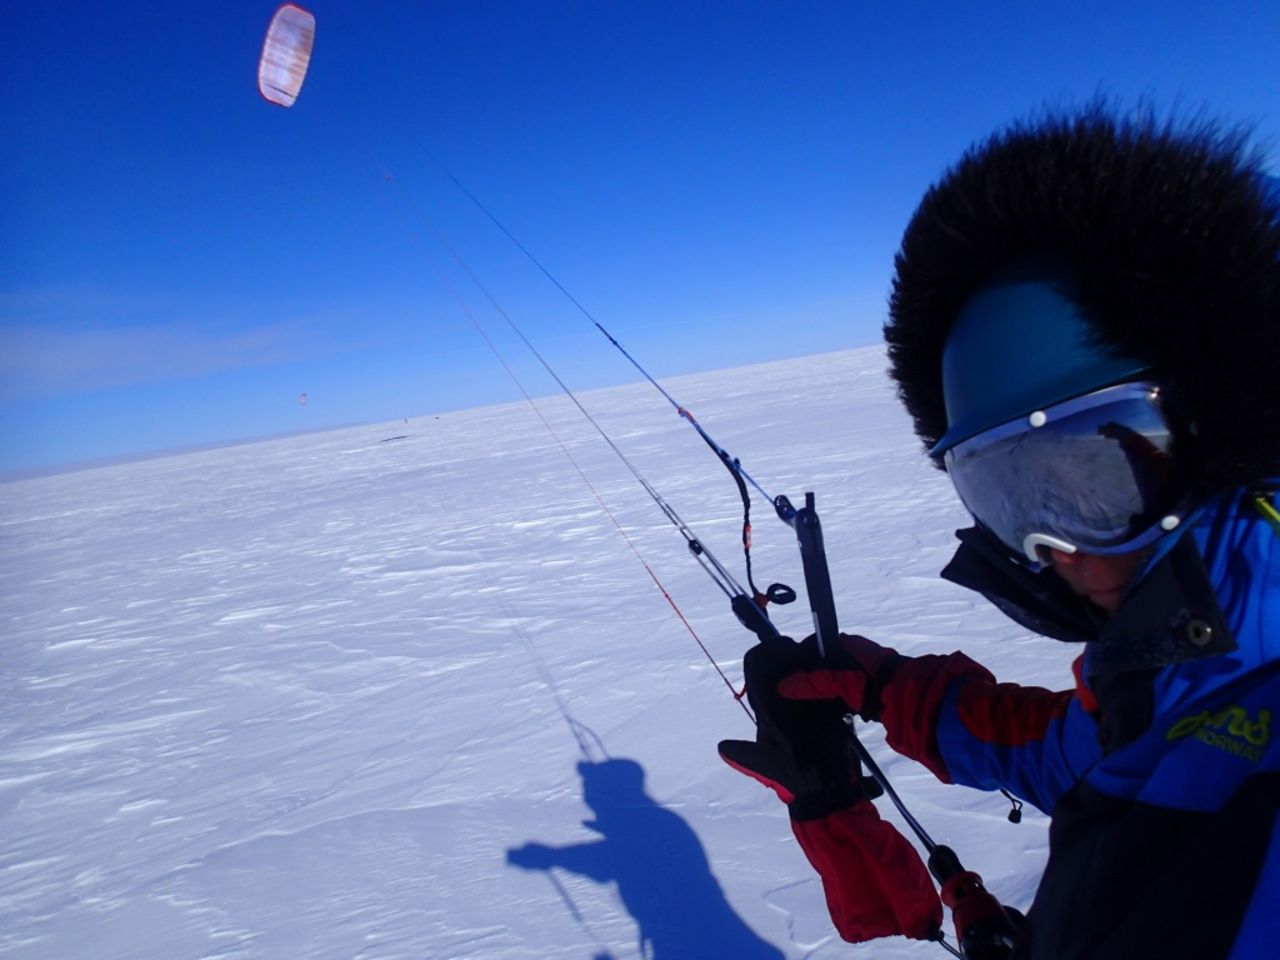 In 2014, Davidsson and her sister crossed the Greenland ice sheet from Narsaq in the south to Qaanaaq in the north. Using snow kites and ski sails, and pulling 120-kilogram sledges, they covered 2,300 kilometers in 36 days, becoming the first Swedes to make the journey.